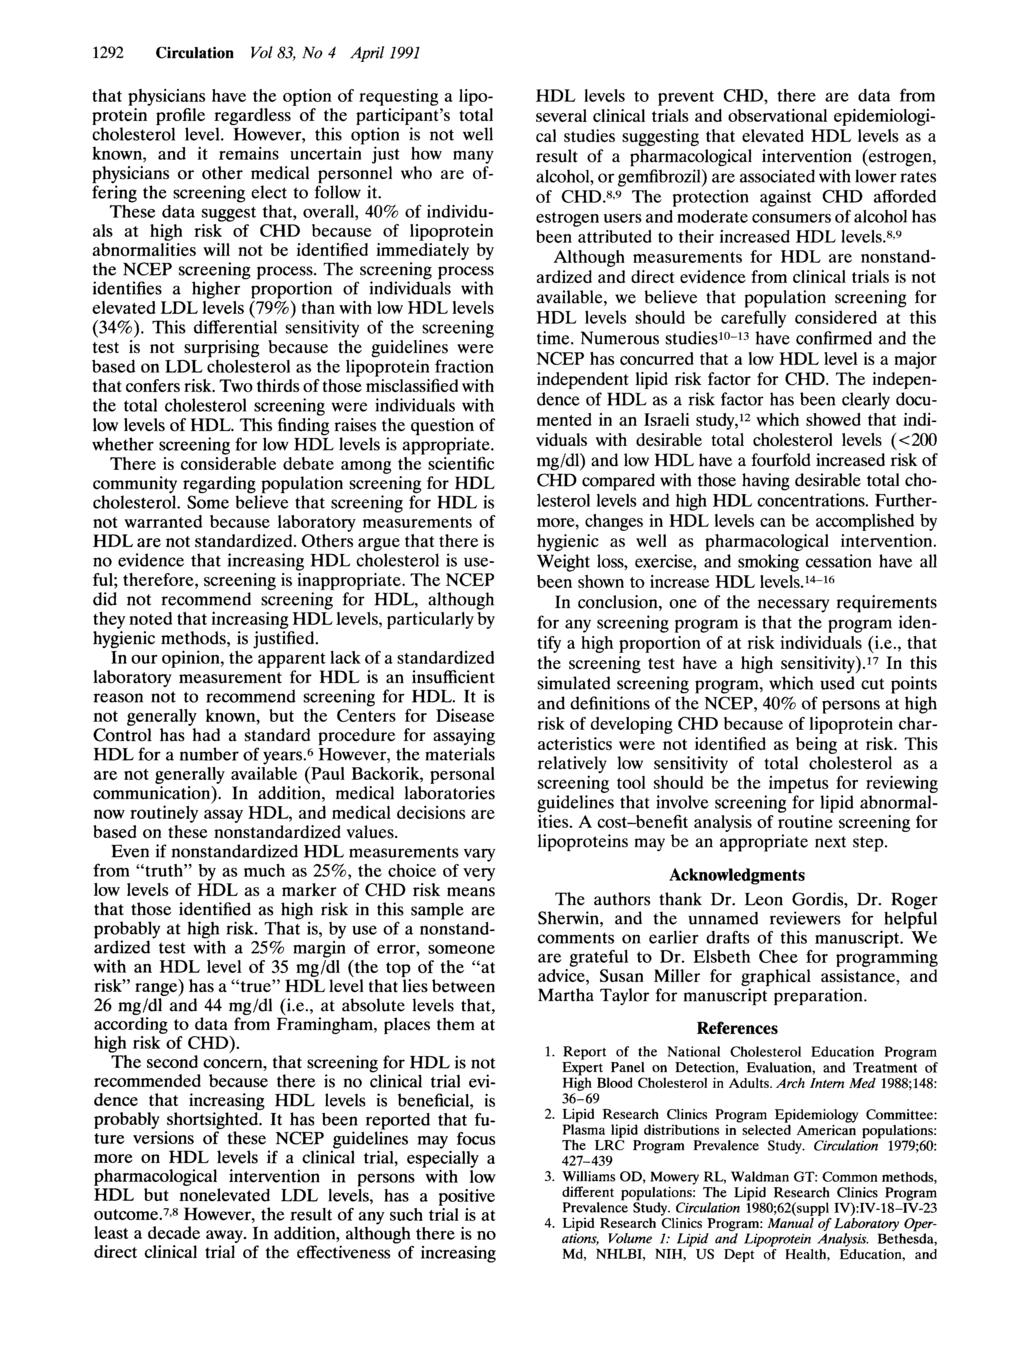 1292 Circulation Vol 83, No 4 April 1991 that physicians have the option of requesting a lipoprotein profile regardless of the participant's total cholesterol level.